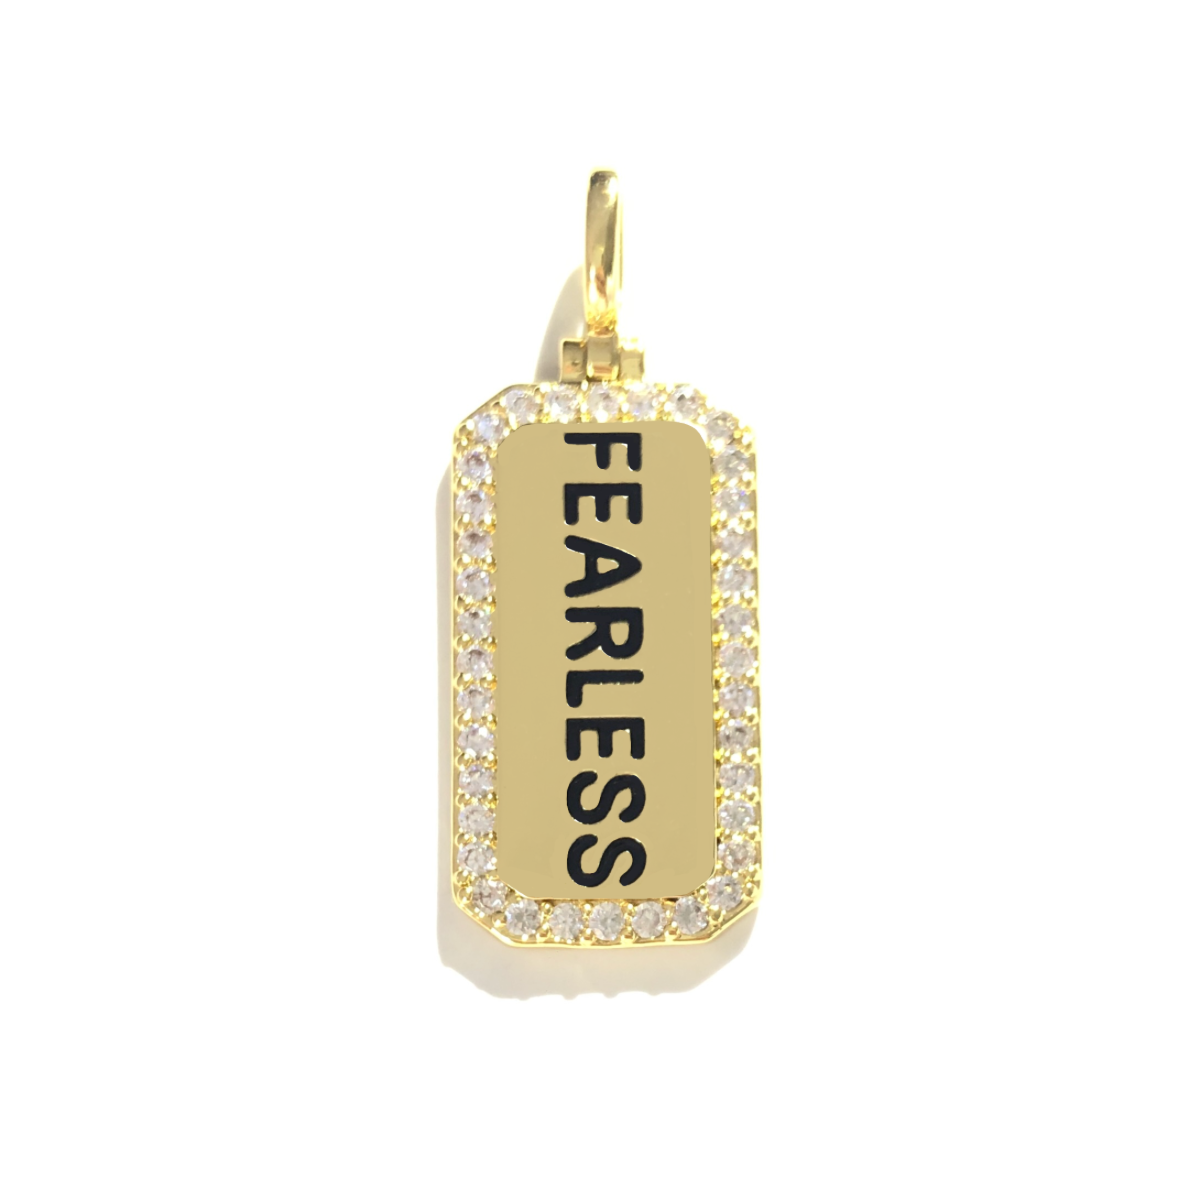 10pcs/lot 38*15mm CZ Paved Fearless Word Tags Charms Pendants Gold CZ Paved Charms Christian Quotes New Charms Arrivals Word Tags Charms Beads Beyond